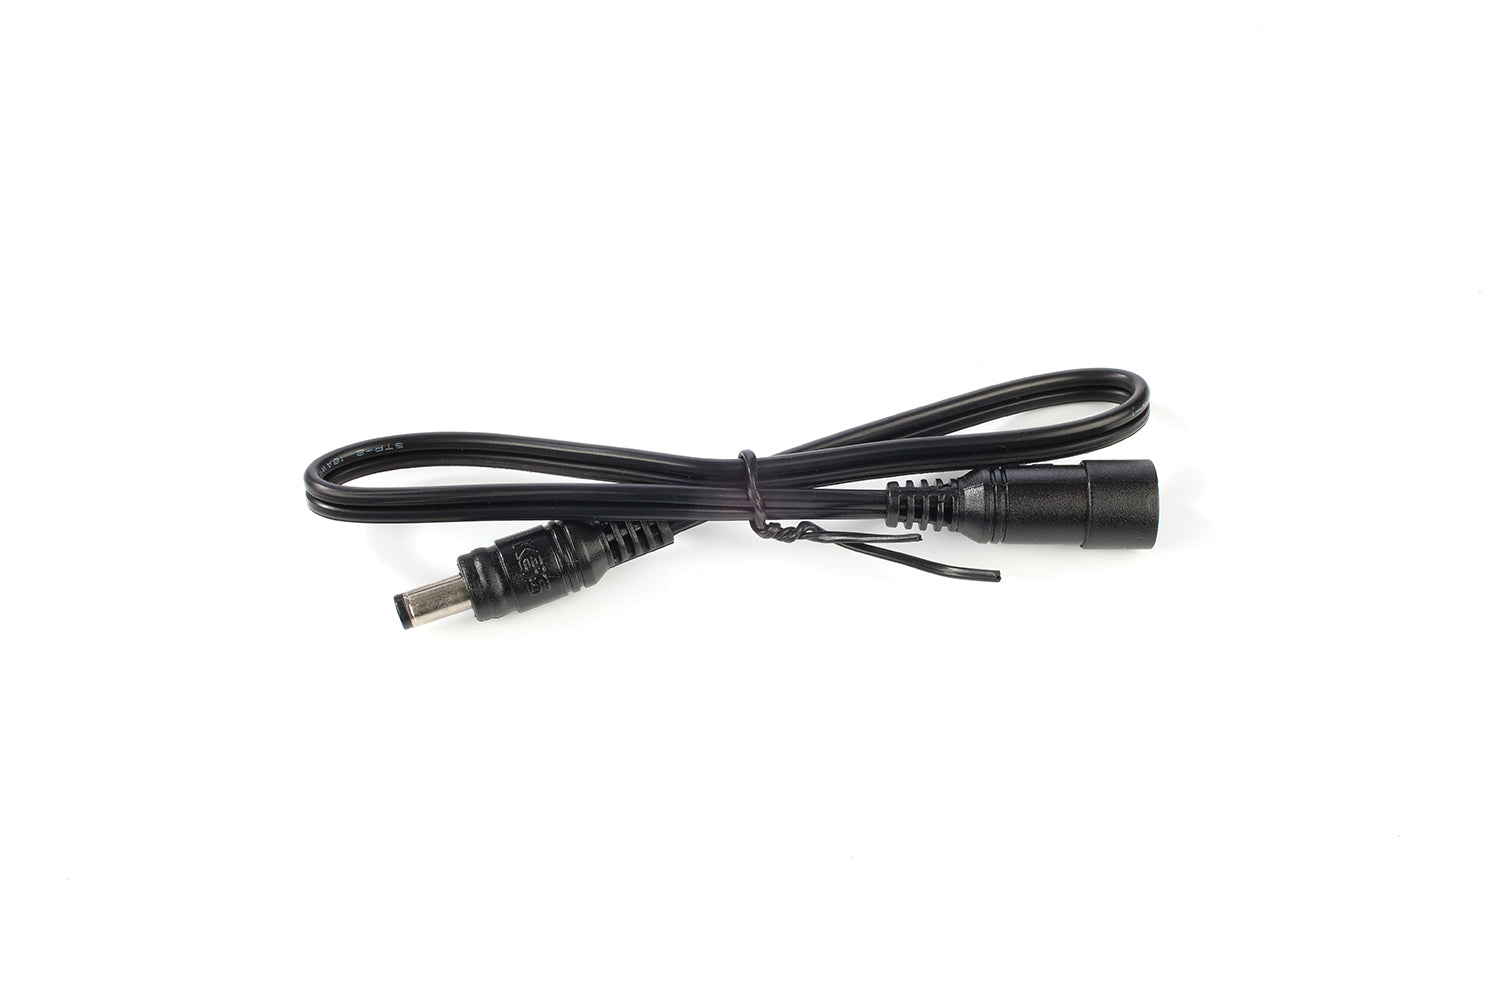 Heated Clothing Cable Extension Leads - Options: 300 or 600 mm